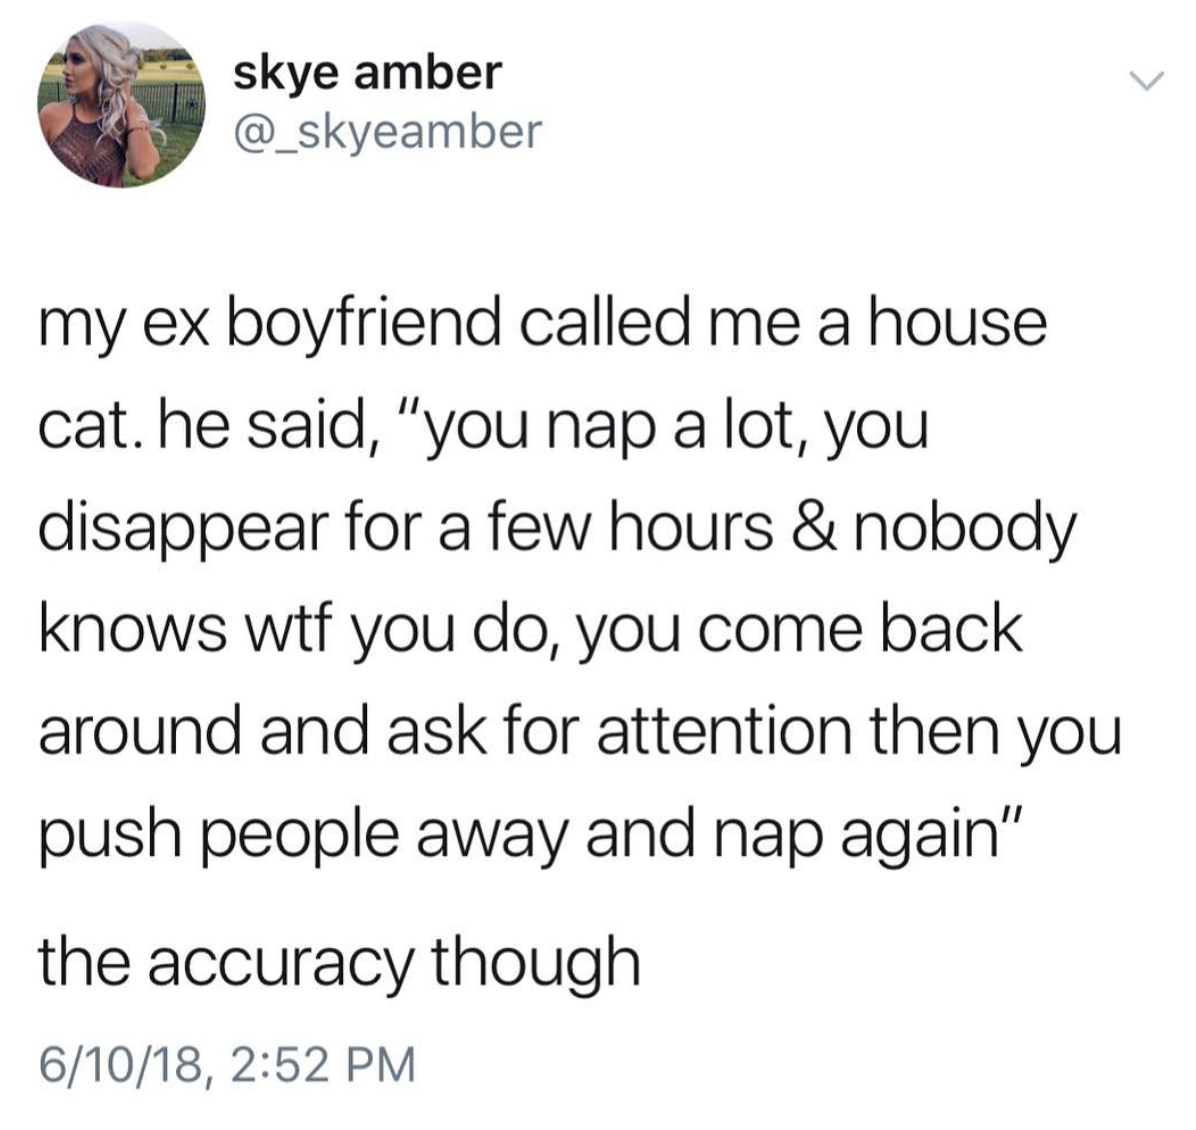 posts about girls supporting girls - skye amber my ex boyfriend called me a house cat. he said, "you nap a lot, you disappear for a few hours & nobody knows wtf you do, you come back around and ask for attention then you push people away and nap again" th